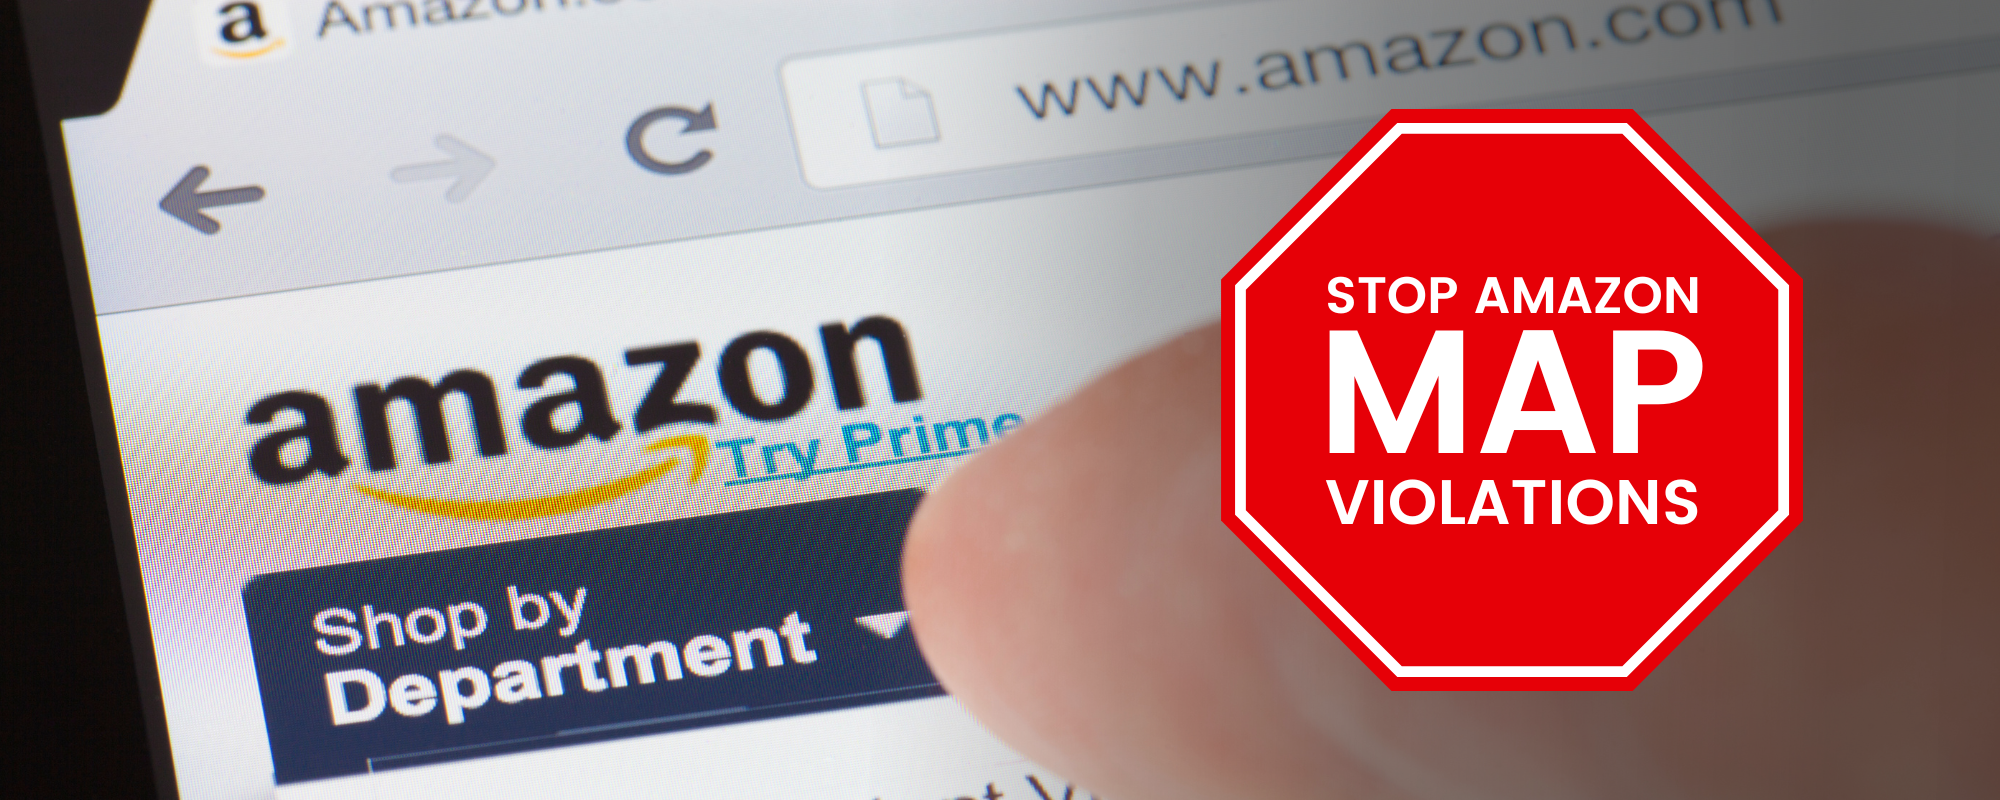 What to do when an Amazon discount causes a reseller to violate MAP without their knowledge